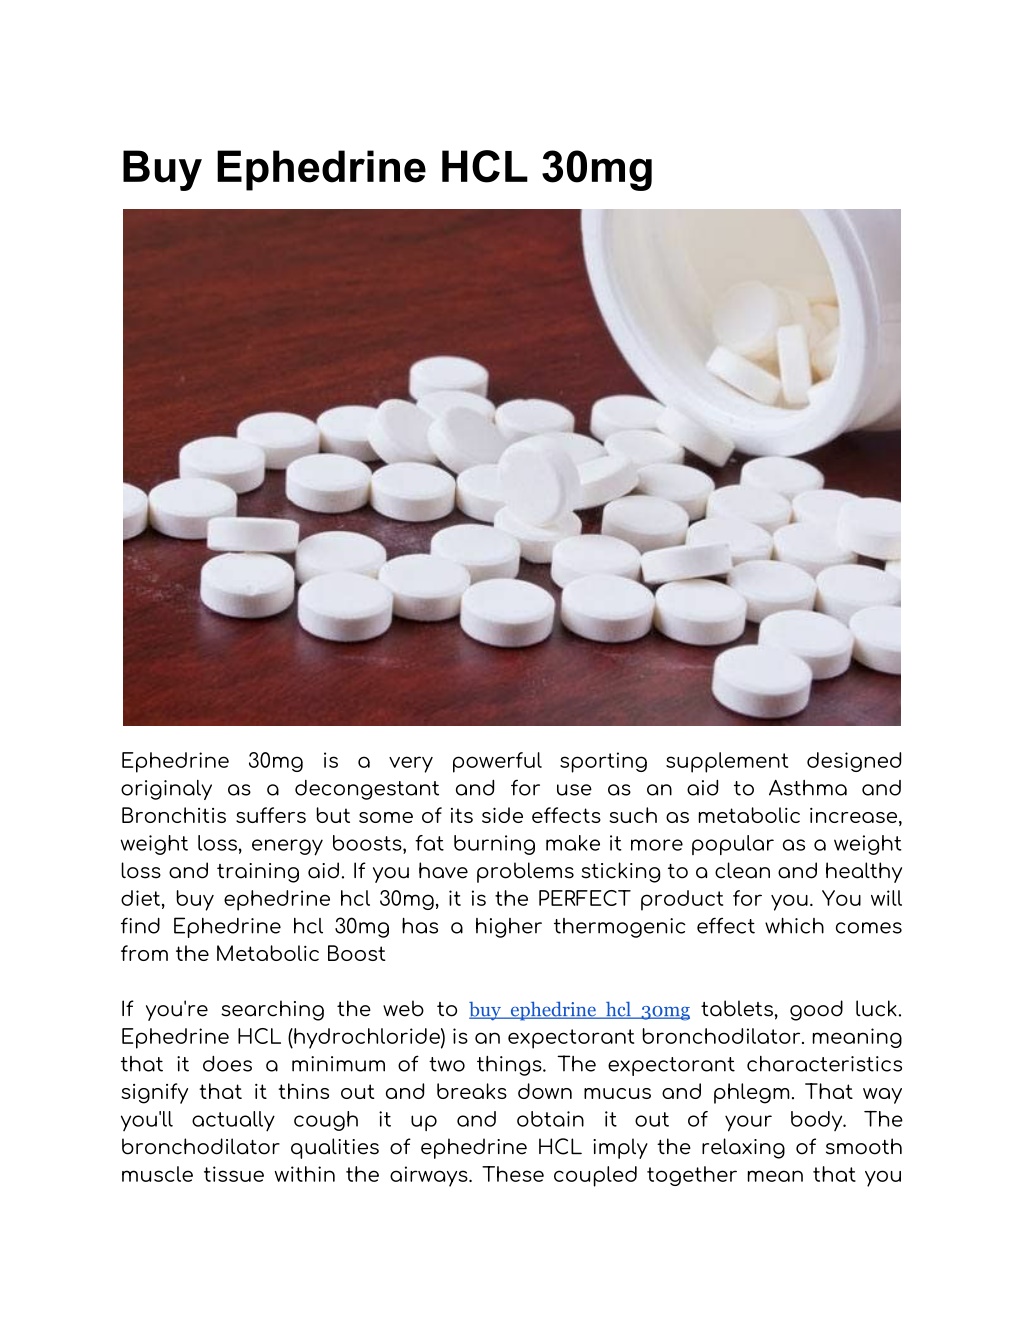 PPT - Buy Ephedrine HCL 30mg PowerPoint Presentation, free download ...